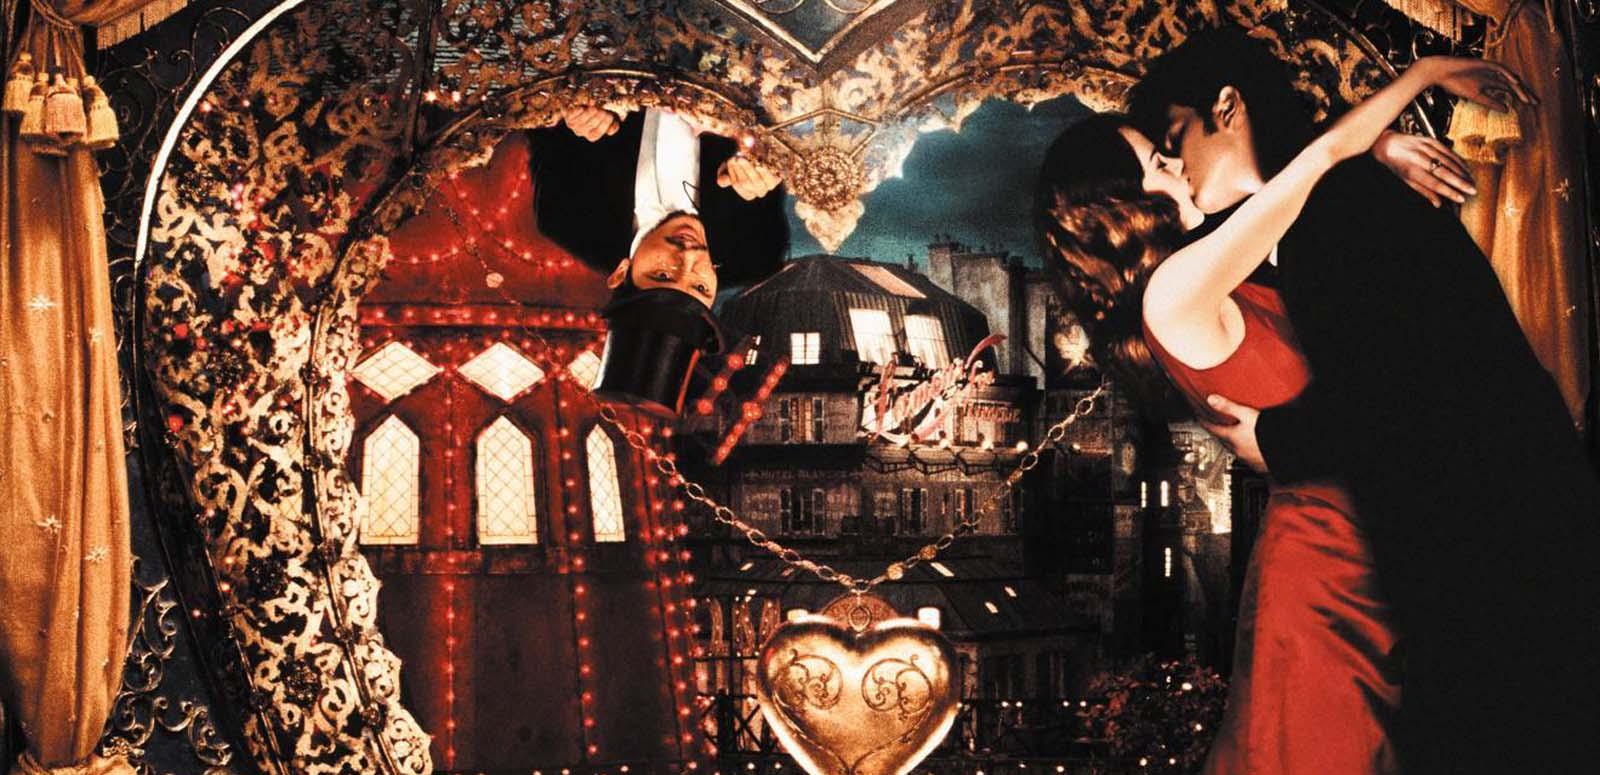 Satine and Christian embrace in her chambers while Toulouse-Lautrec peers down at them from outside a heart-shaped window, in a scene from Moulin Rouge!